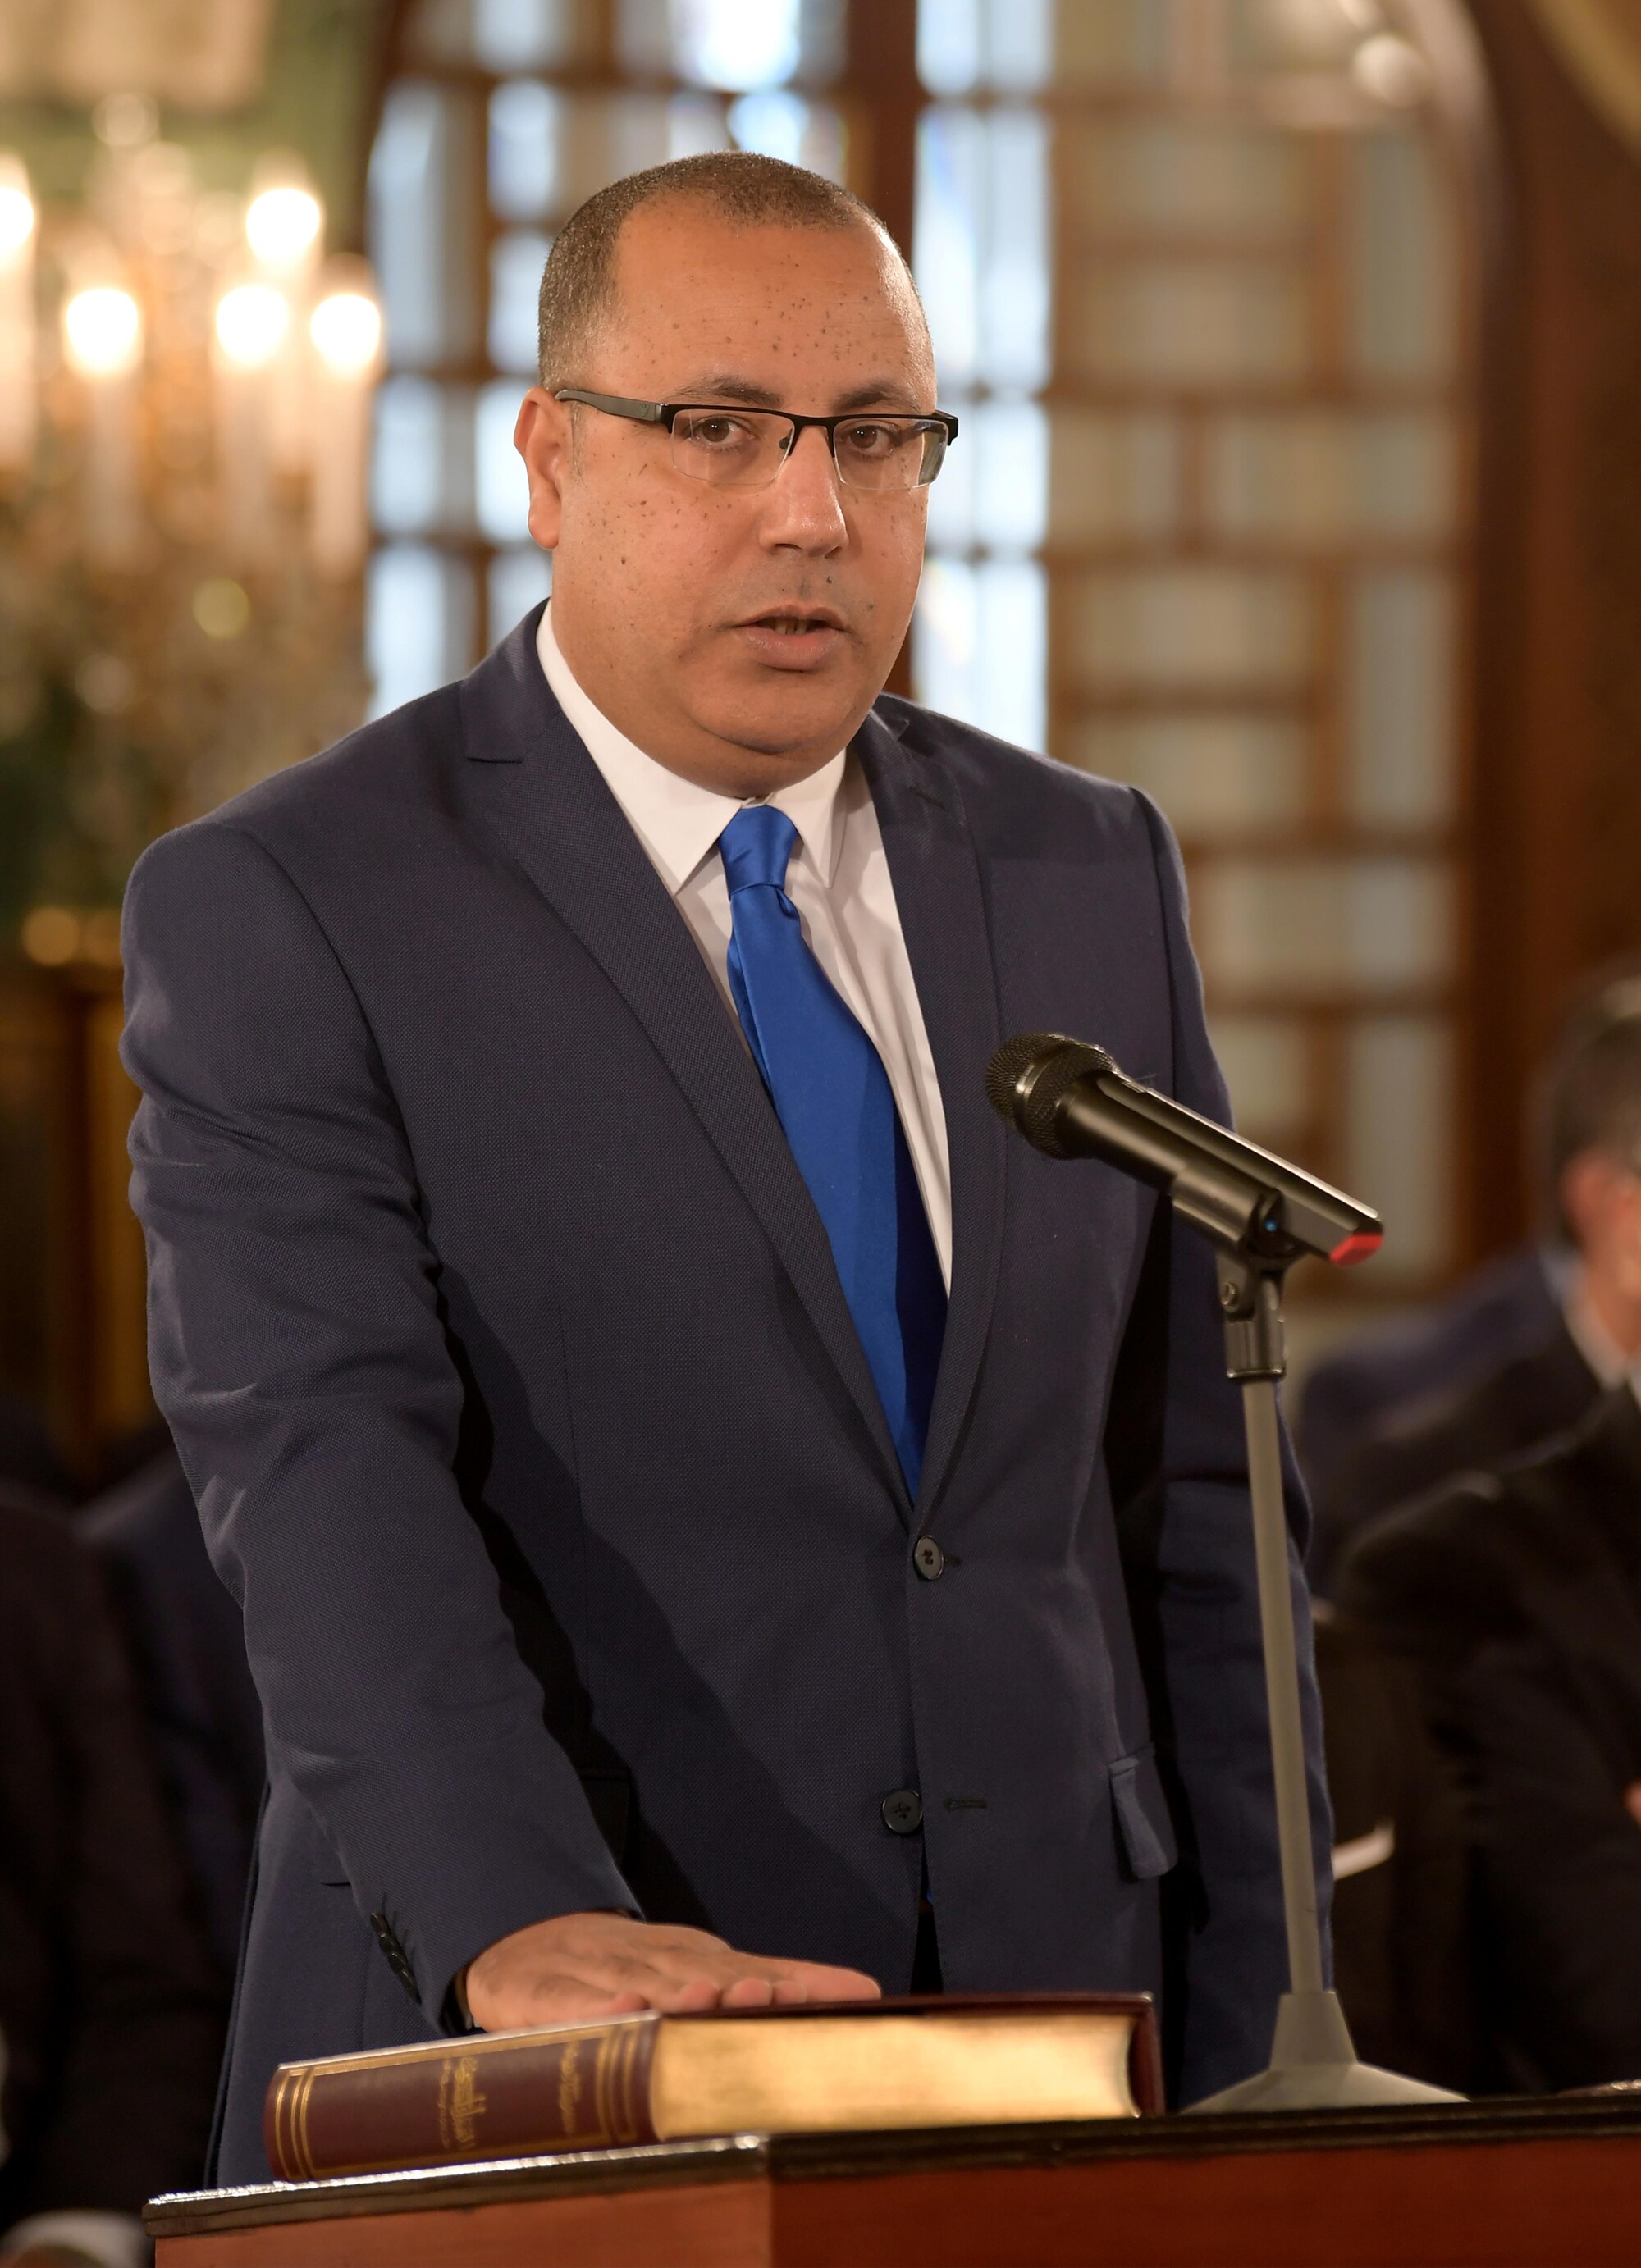 Tunisian PM appoints new ministers in sweeping cabinet reshuffle